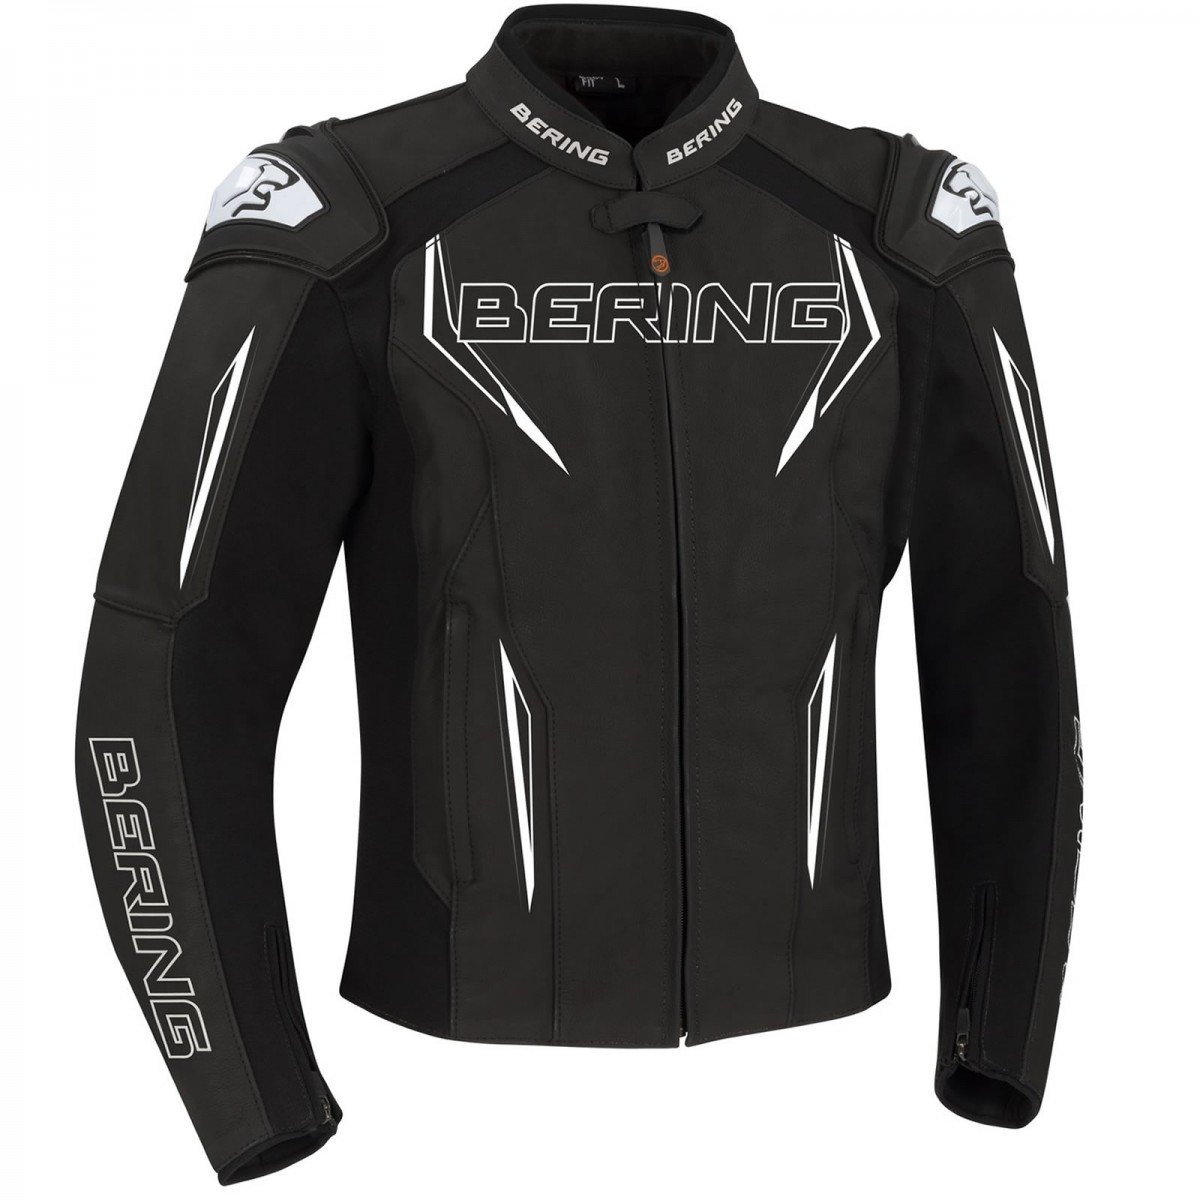 Image of Bering Sprint-R Leather Jacket Black White Gray Talla M